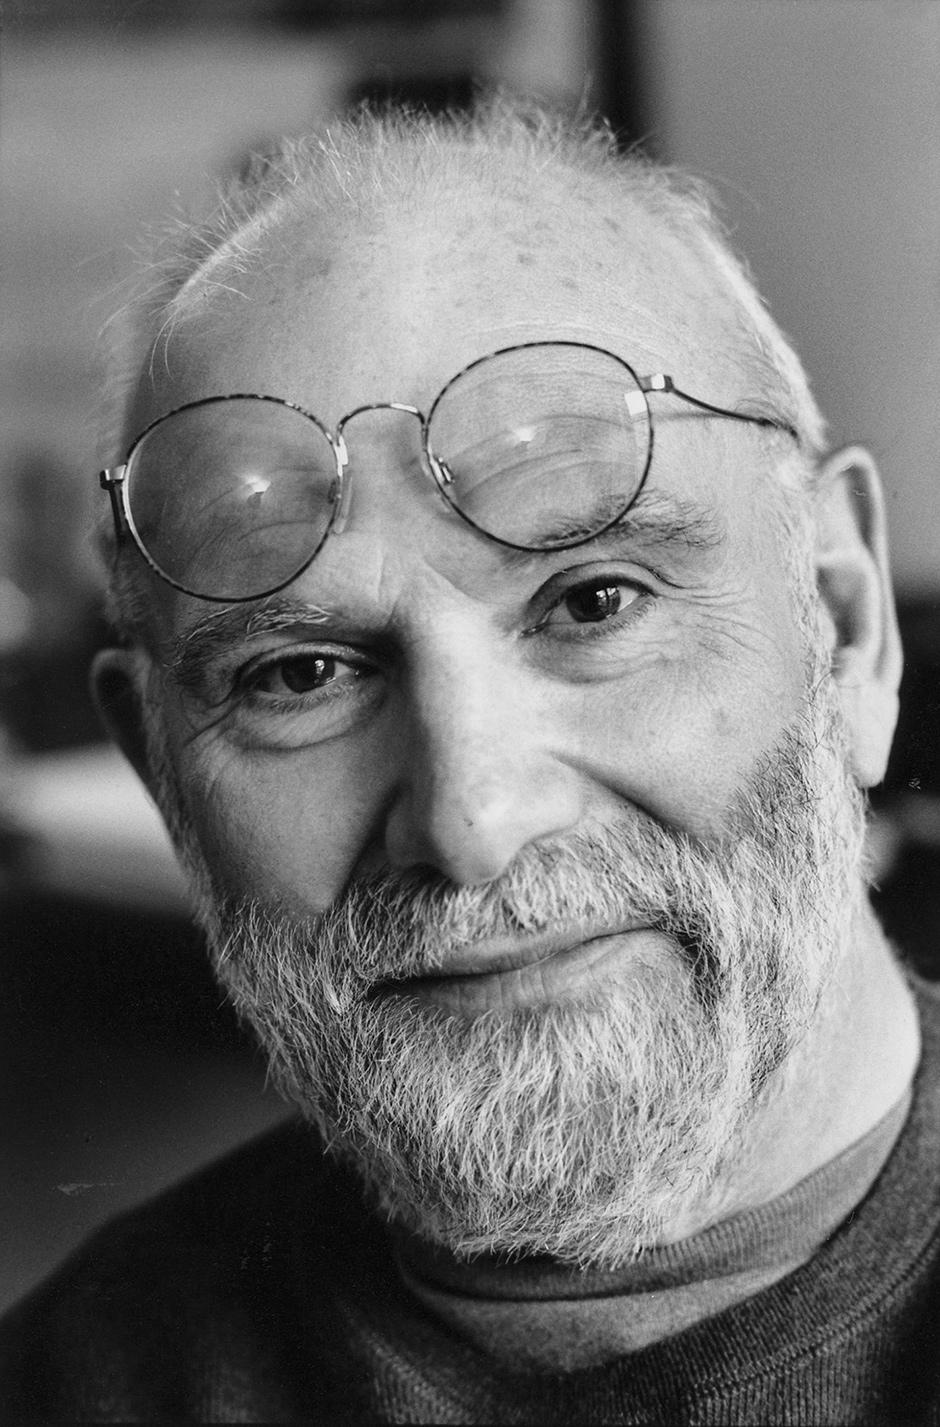 The Victory of Oliver Sacks